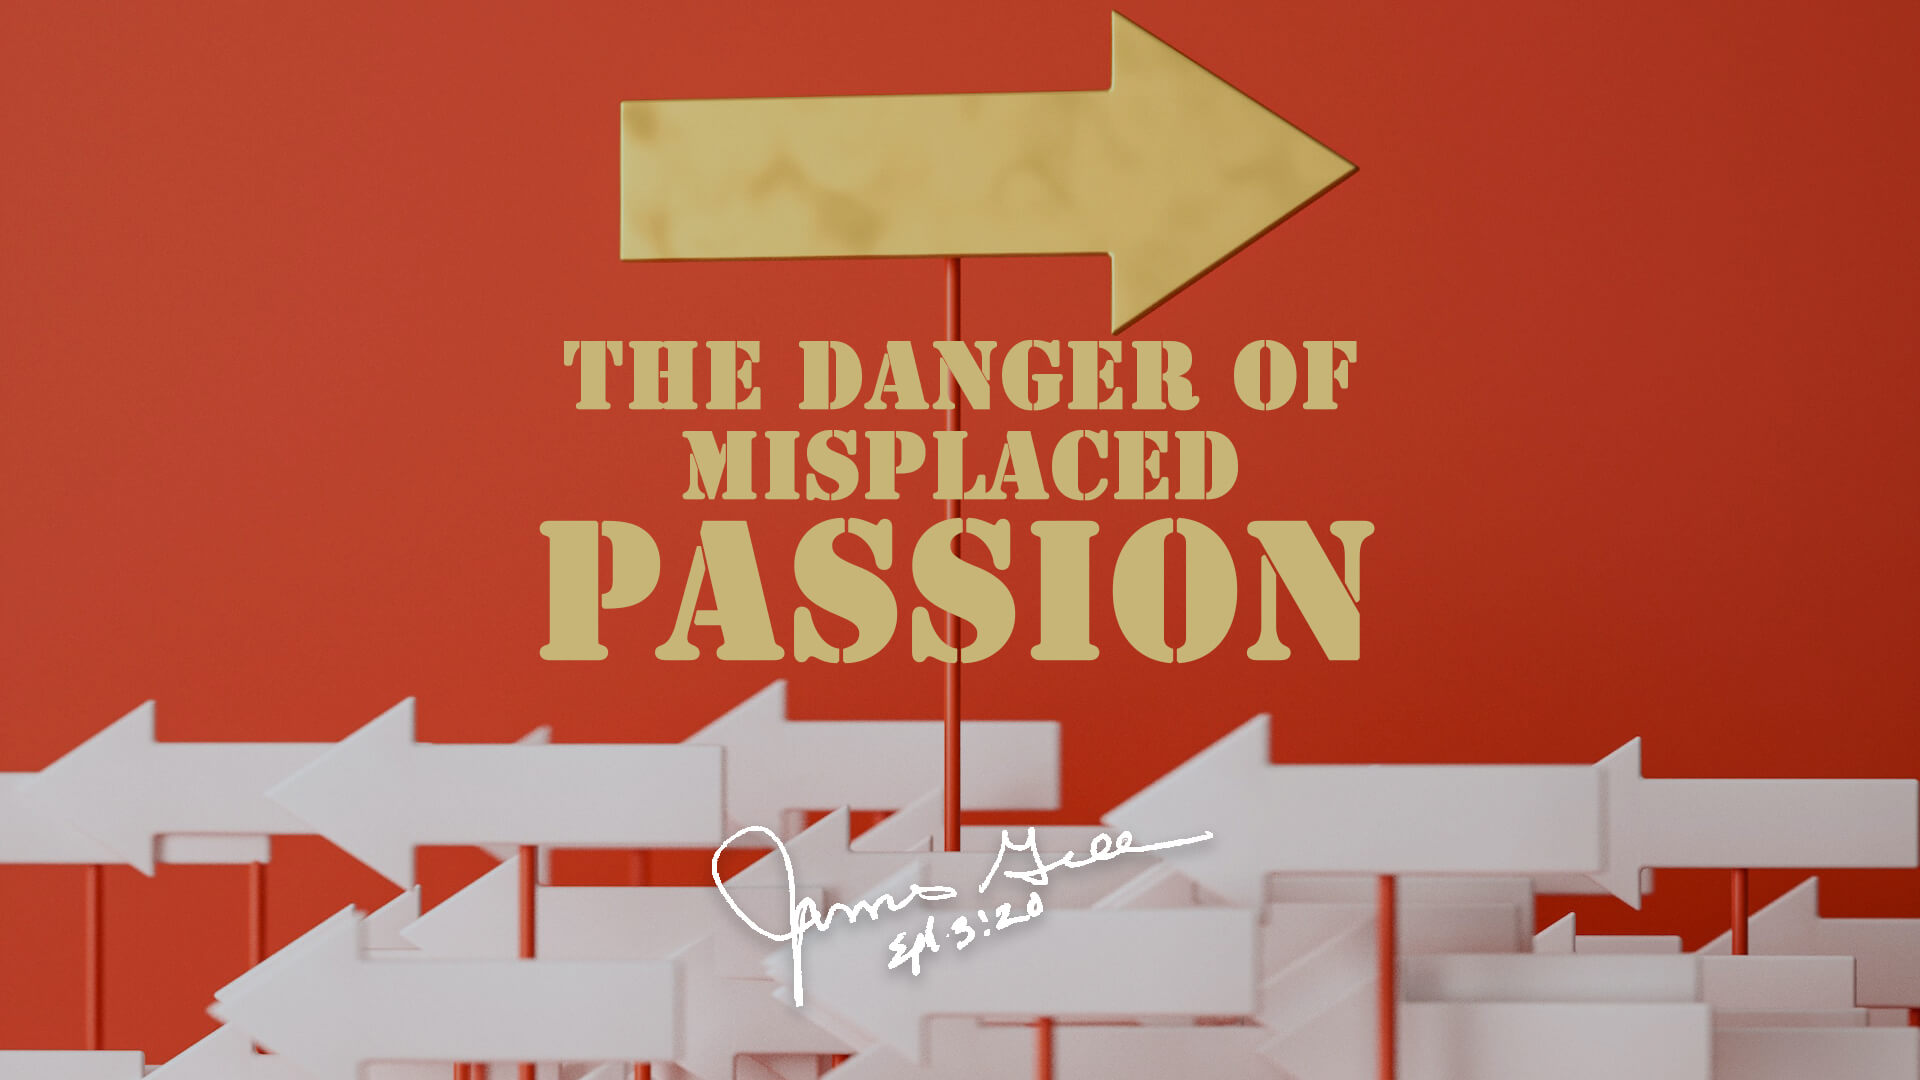 The Danger of Misplaced Passion